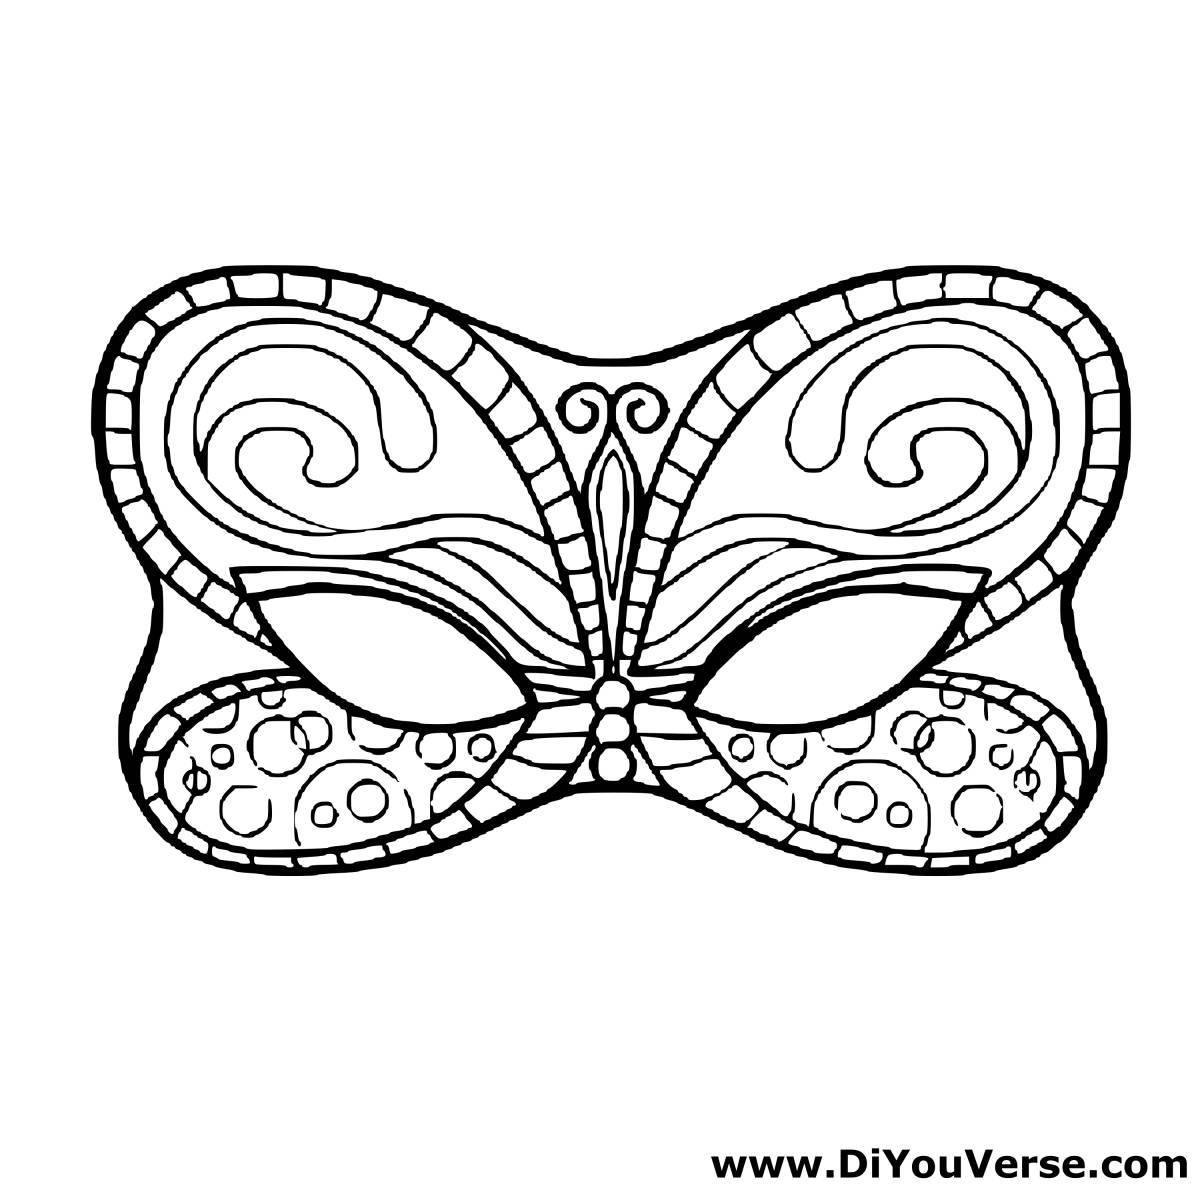 Coloring page funny face mask